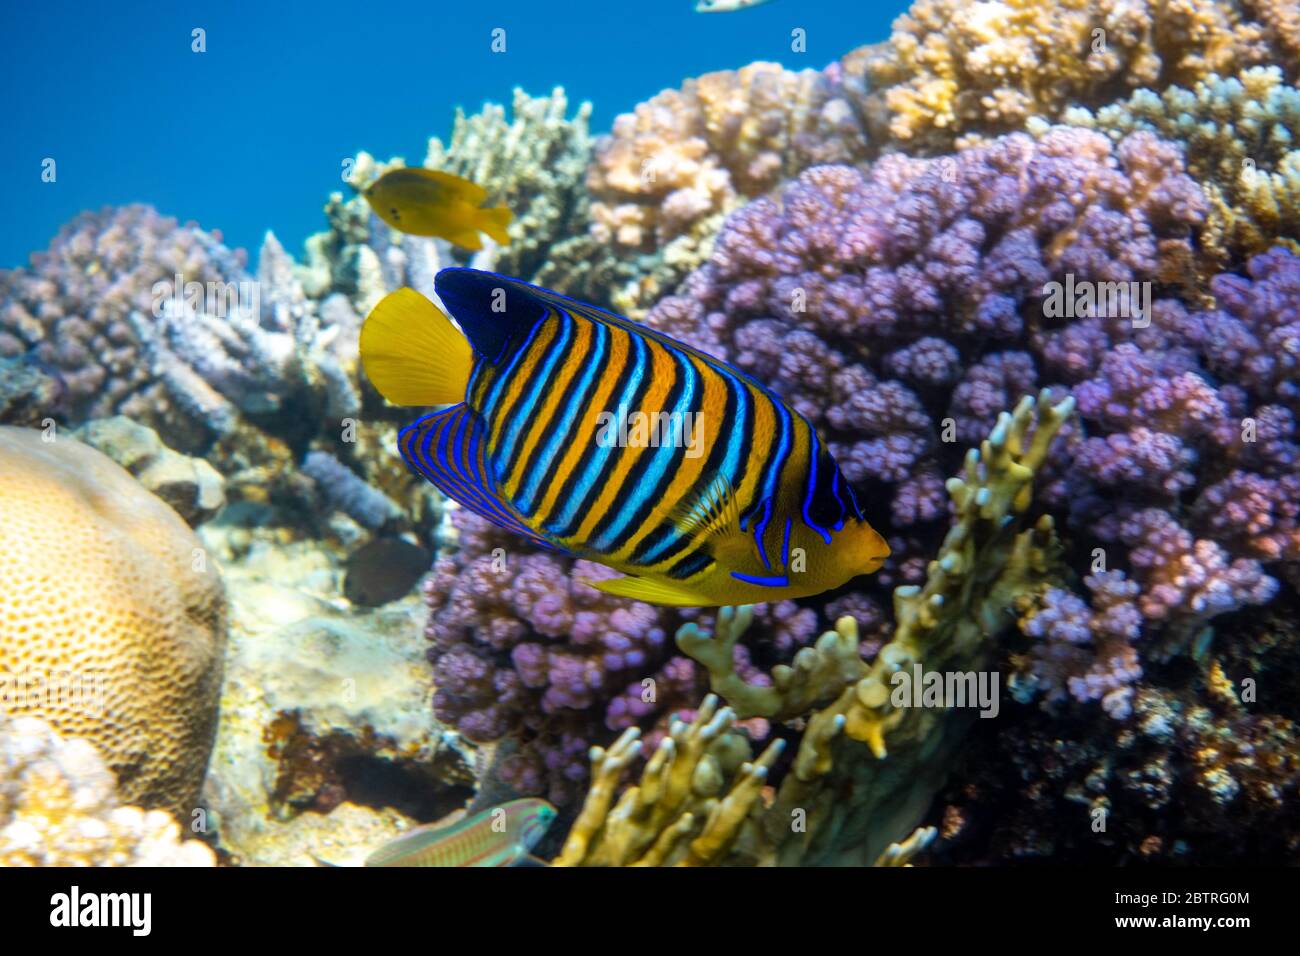 Royal Angelfish (Regal Angel Fish) over a coral reef, Red Sea, Egypt. Tropical colorful orange, white and blue striped fish with yellow fins,  in blue Stock Photo